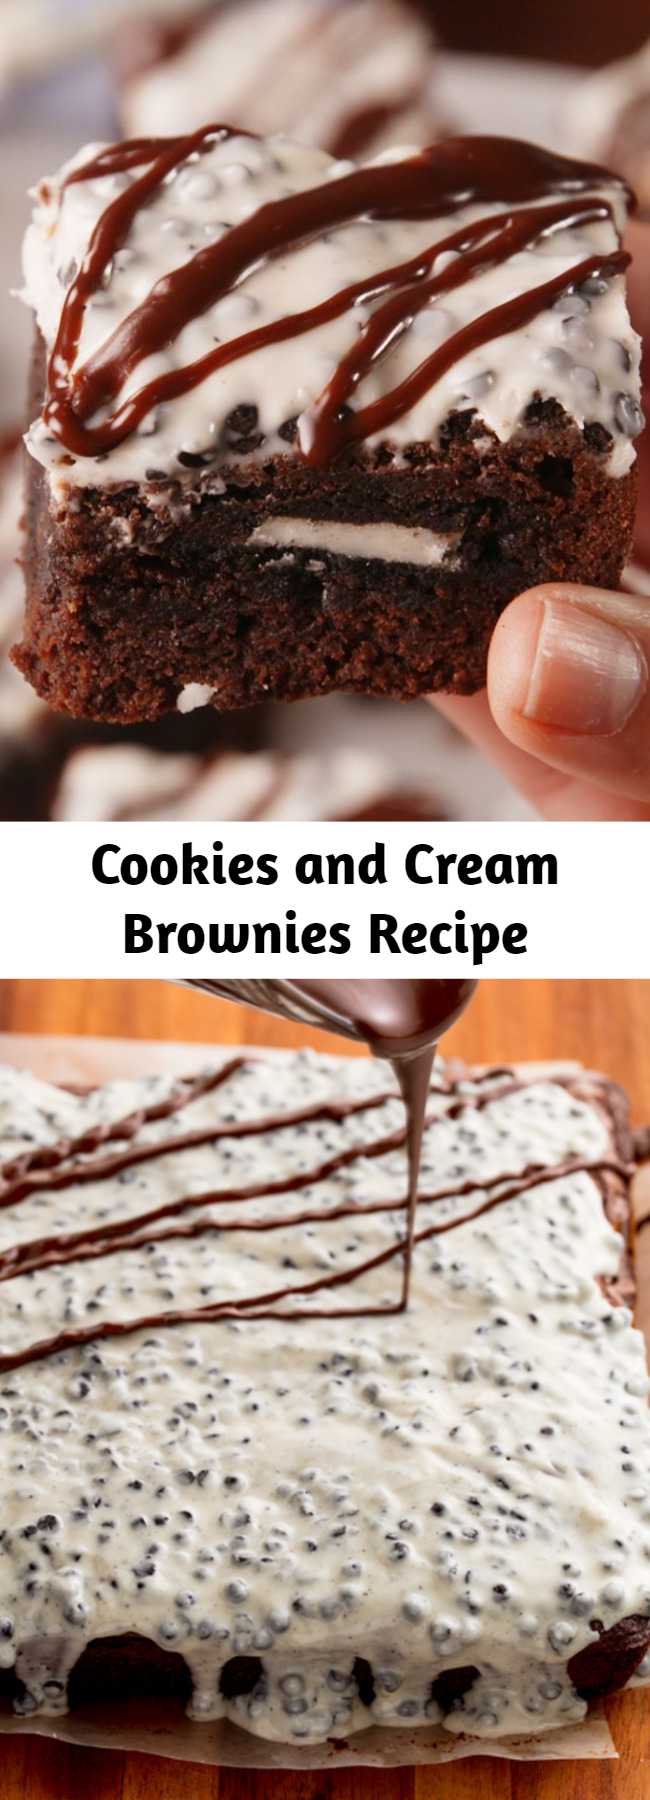 Cookies and Cream Brownies Recipe - If you ask us, Cookies 'N' Creme candy bars are highly underrated. Even the white chocolate haters on our team can't resist them (because those crunchy chocolate bits are everything). And as it turns out, melting them down makes the perfect frosting for fudgy brownies. Especially when there are WHOLE OREOS stuffed inside. 😏